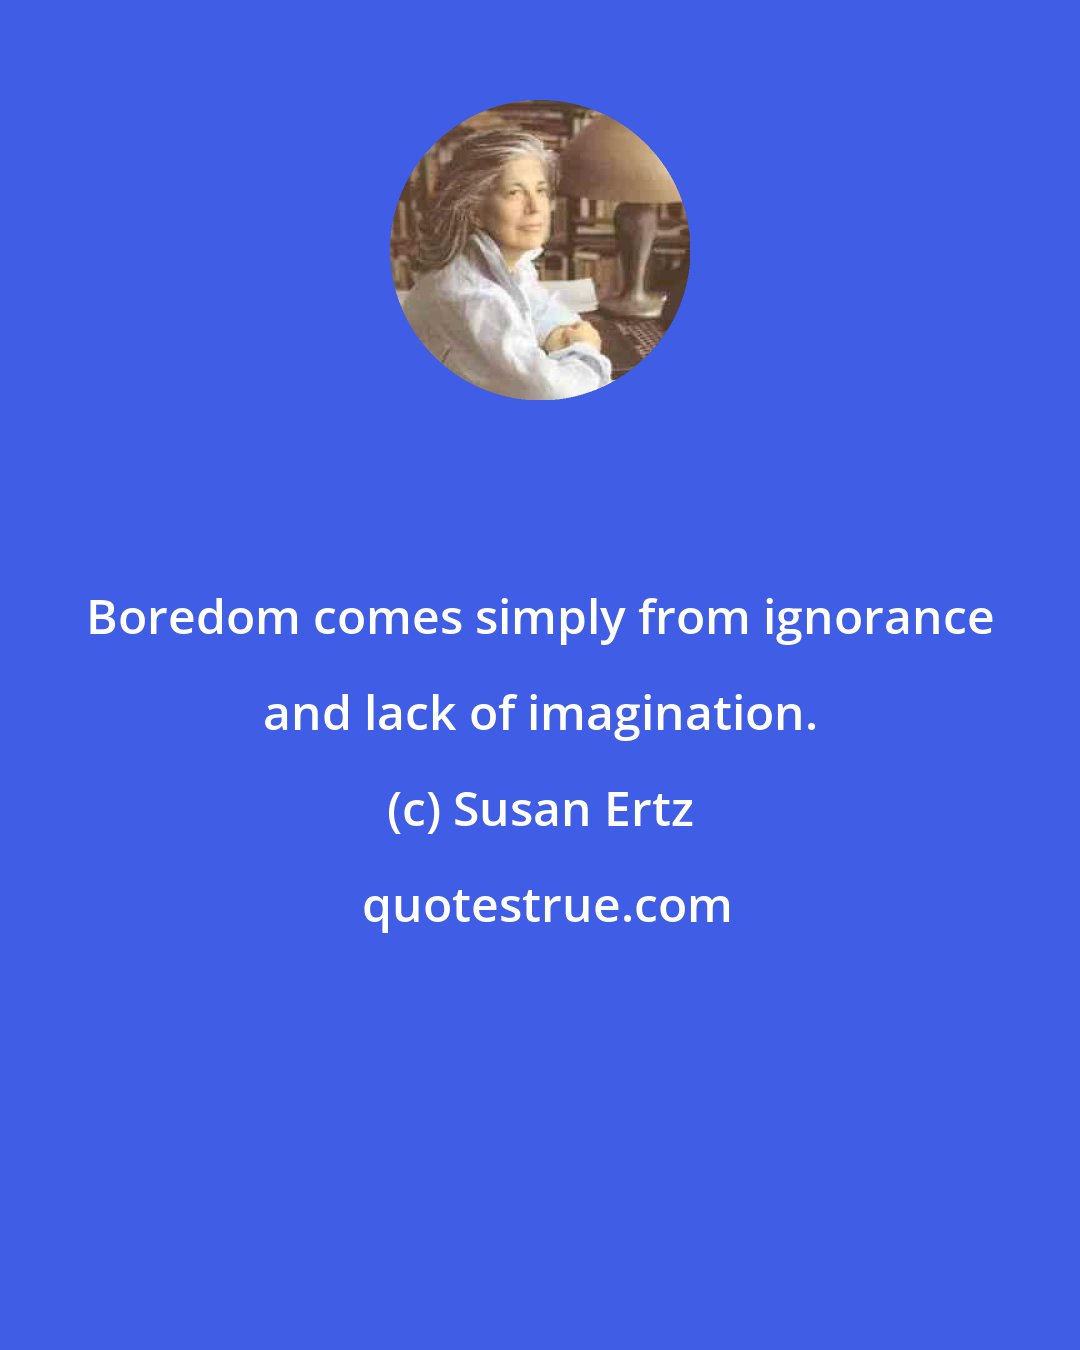 Susan Ertz: Boredom comes simply from ignorance and lack of imagination.